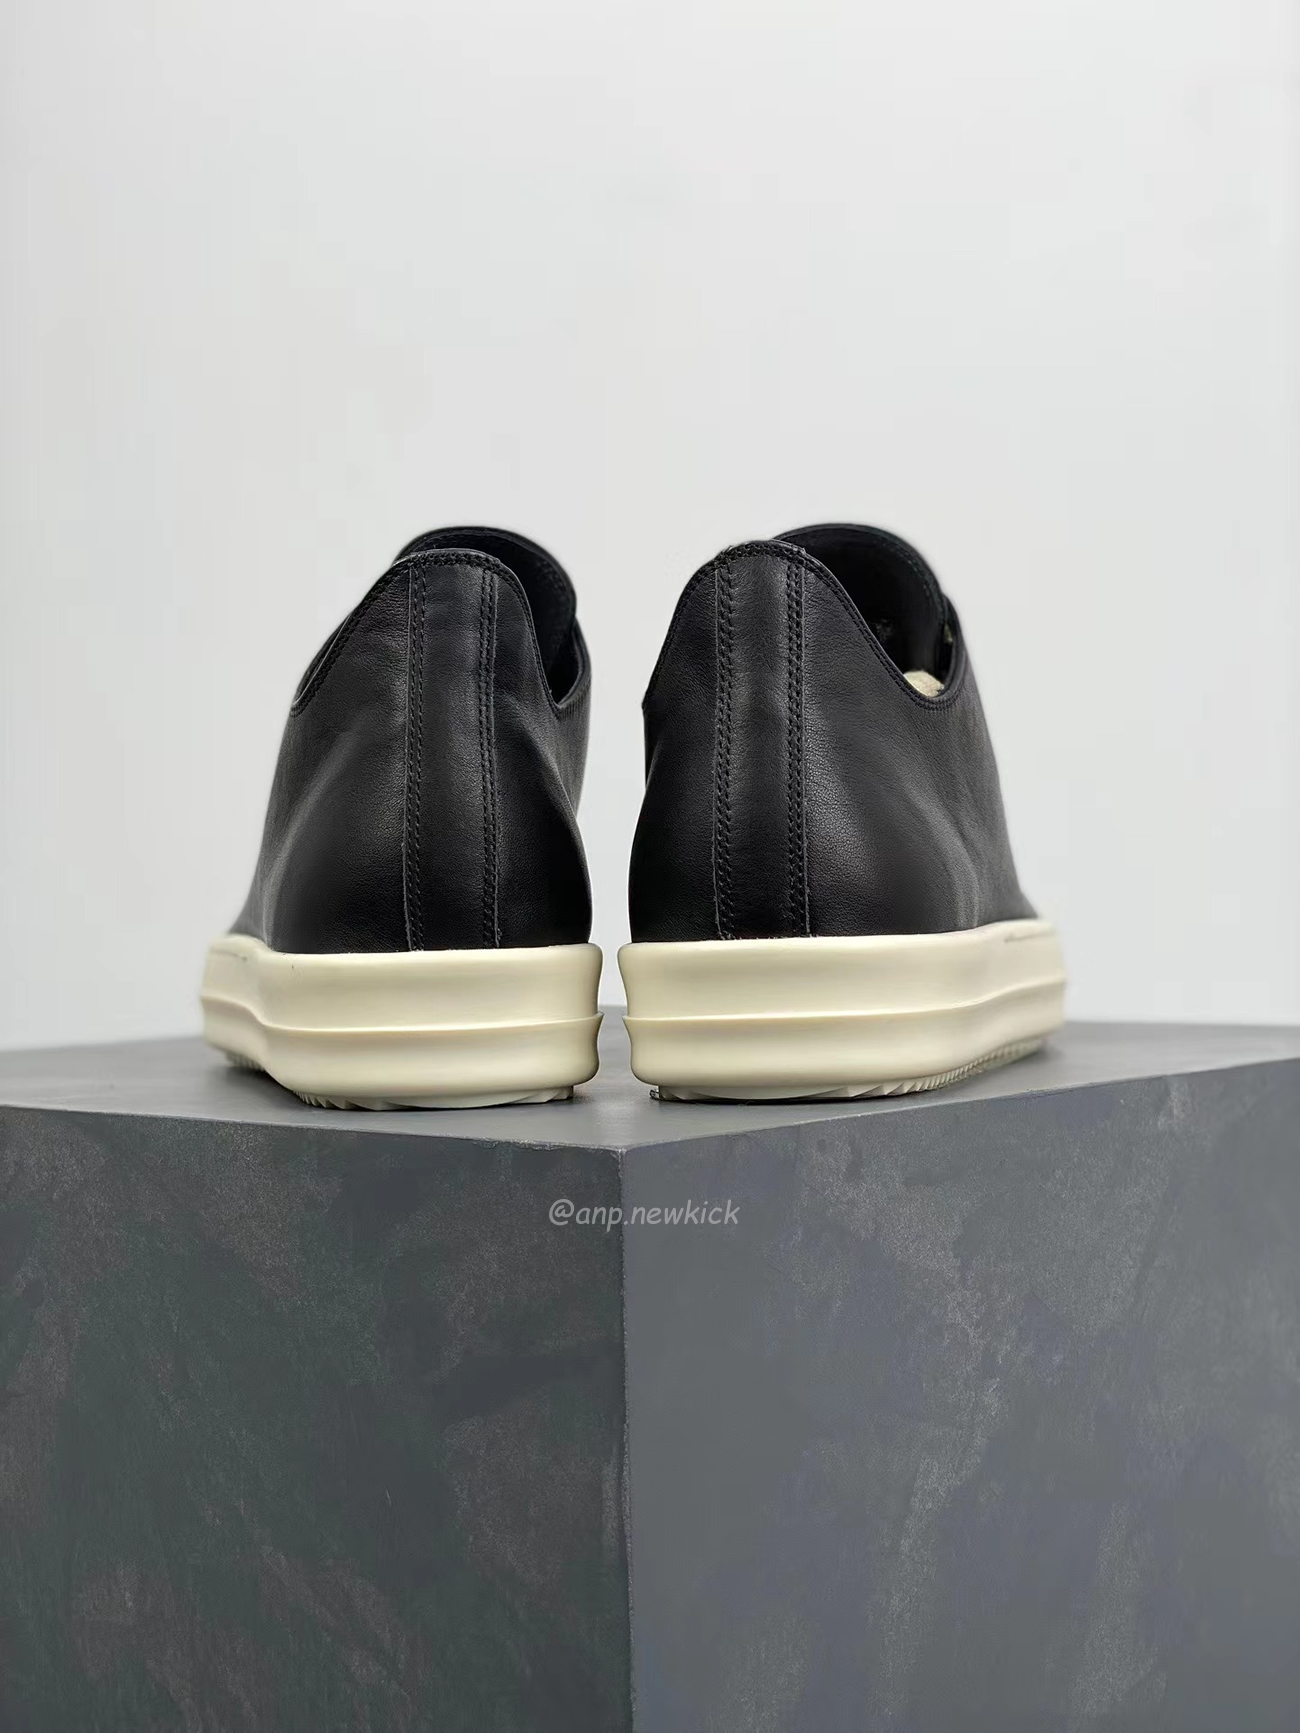 Rick Owens Leather Low Top Vintage Sneakers Suede Canvas Black Taupe Grey Faded Pnk Pearl Milk Dark Dust (24) - newkick.org